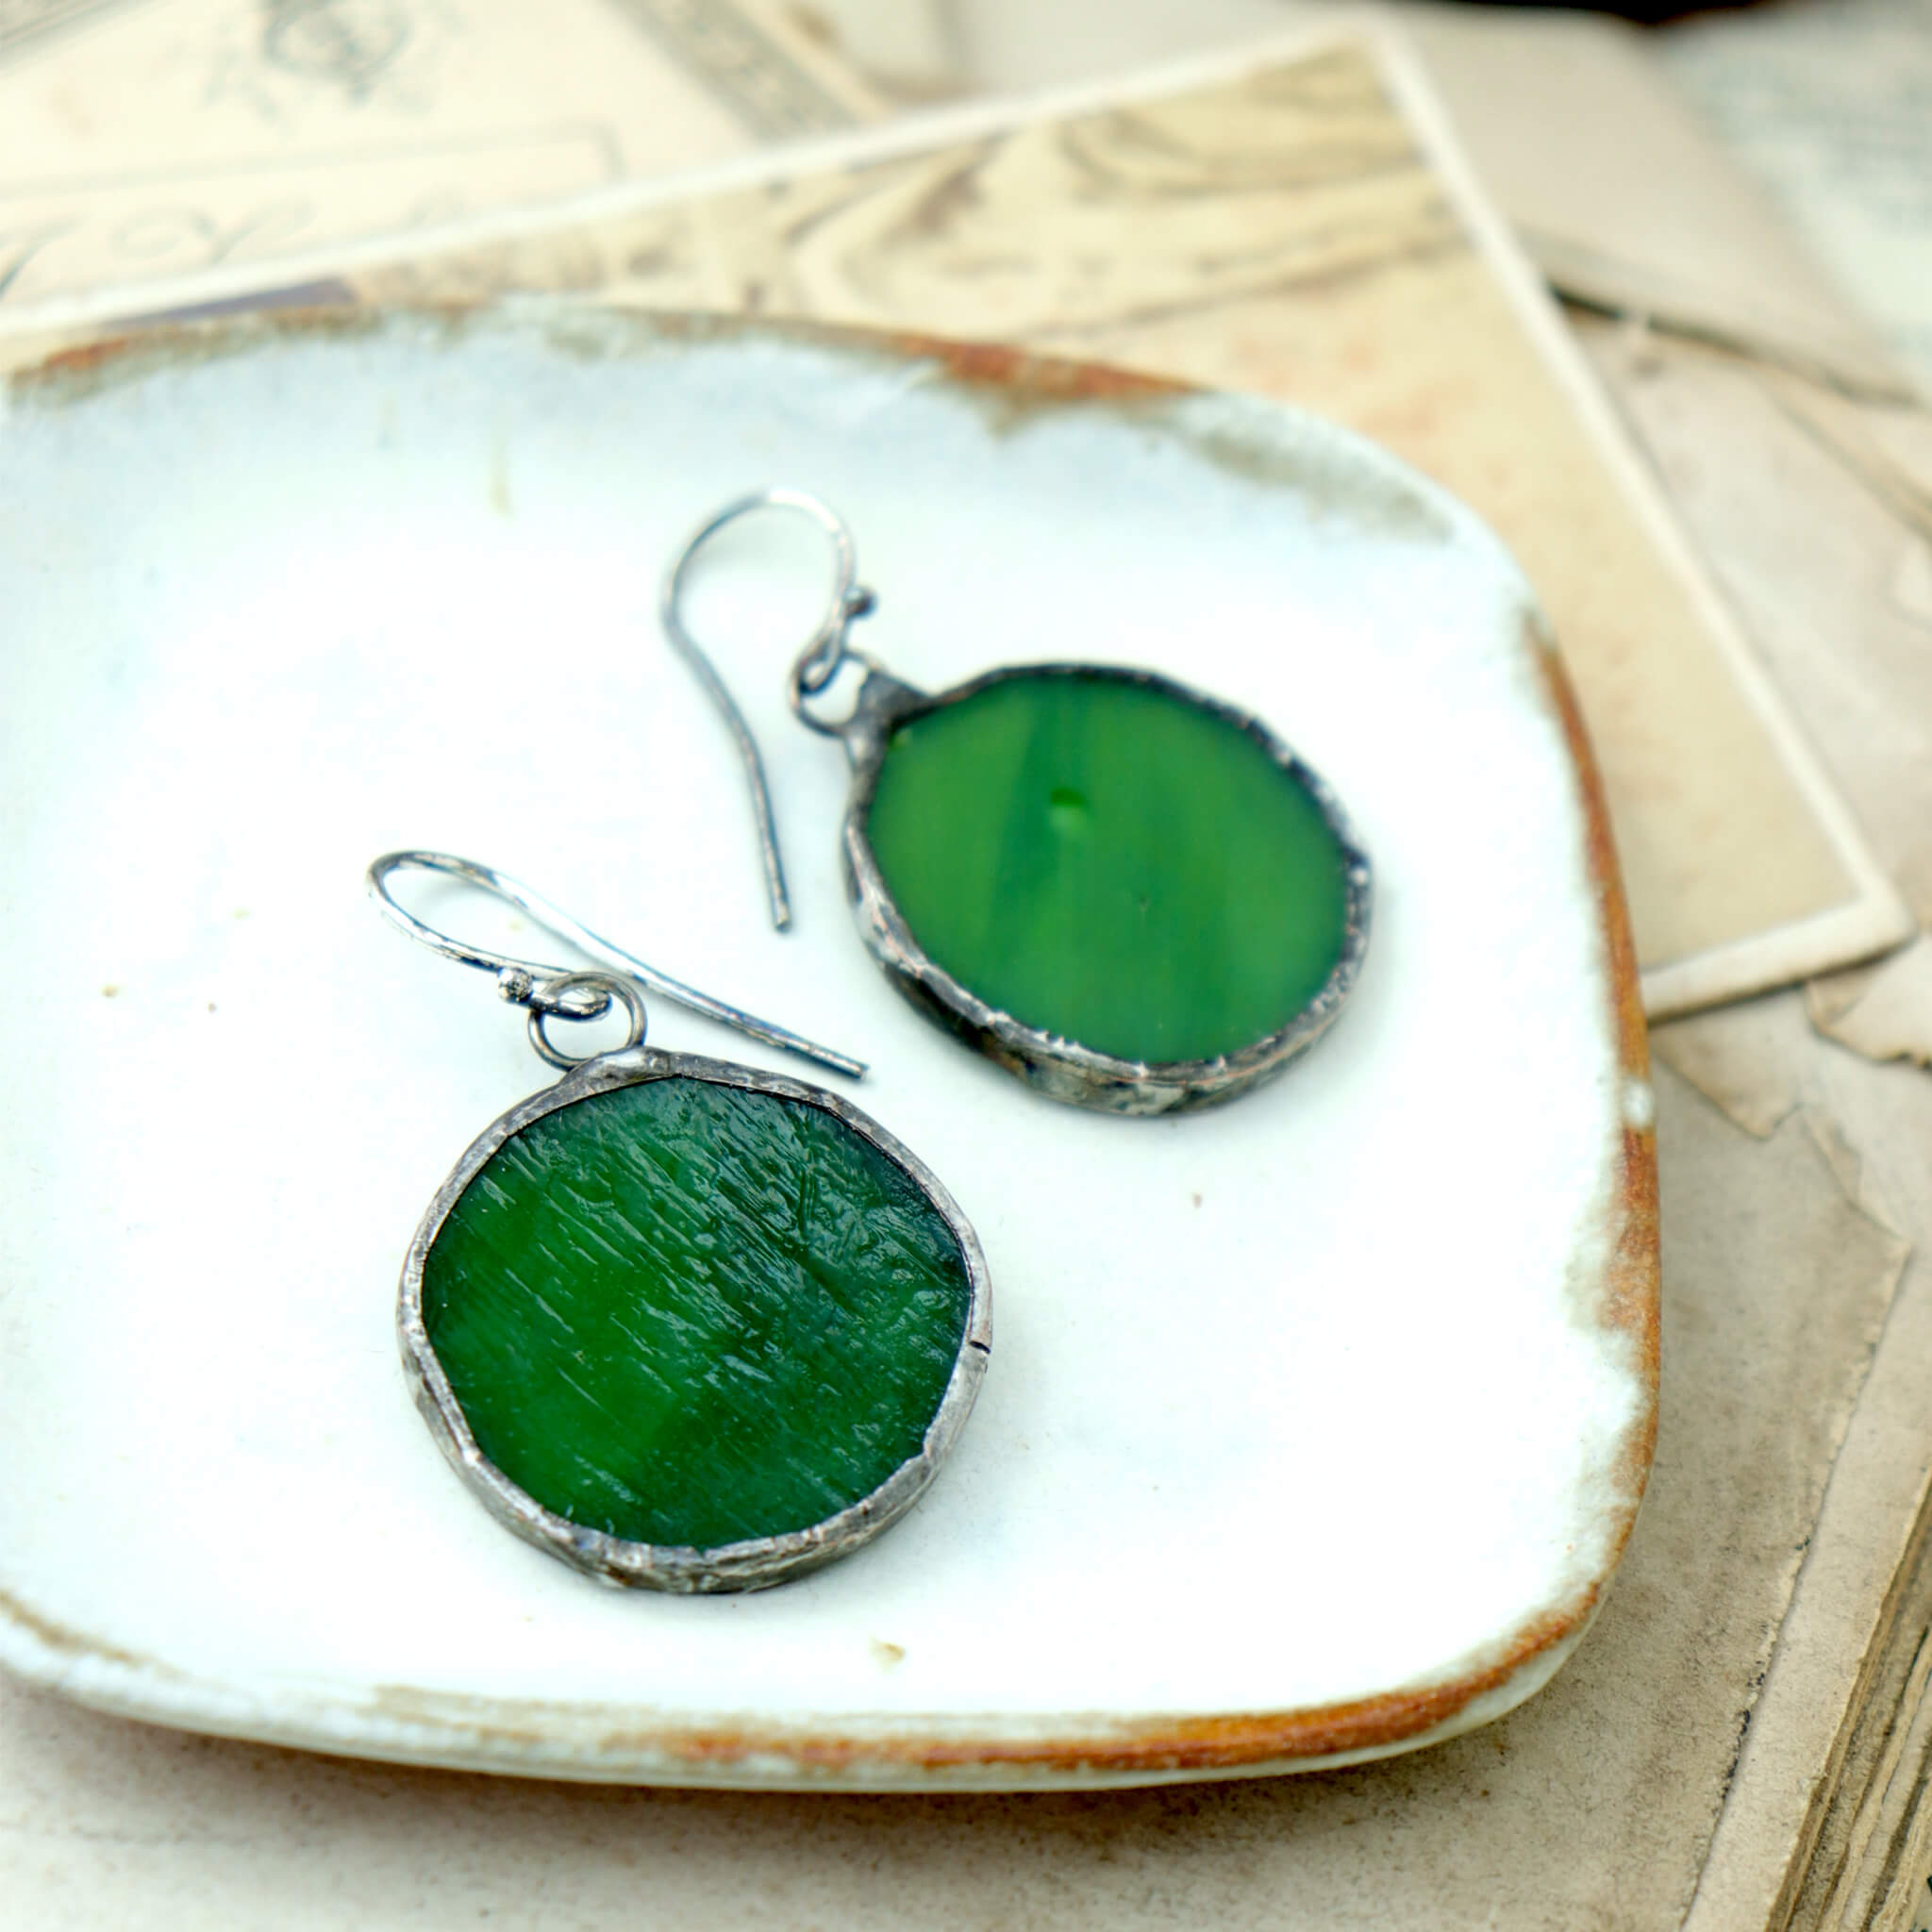 circles of glass in green colour turned into stained glass earrings lying on a white dish